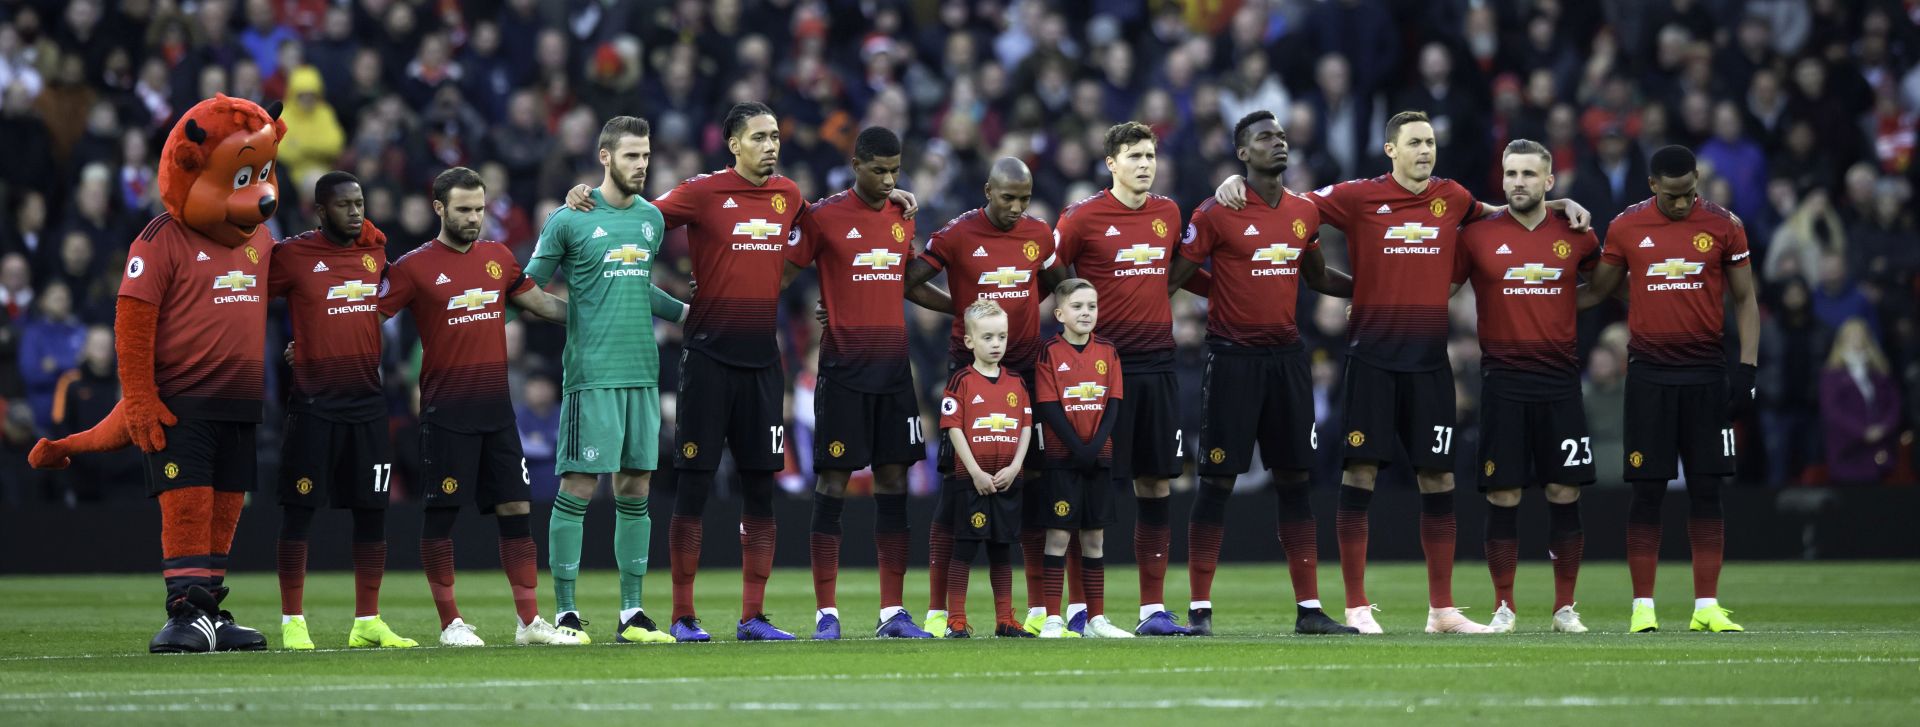 epa07127030 Manchester United players observe a minutes silence before the Manchester United v Everton English Premier League soccer match, in Manchester, Britain, 28 October 2018.  EPA/JON SUPER EDITORIAL USE ONLY. No use with unauthorized audio, video, data, fixture lists, club/league logos or 'live' services. Online in-match use limited to 75 images, no video emulation. No use in betting, games or single club/league/player publications